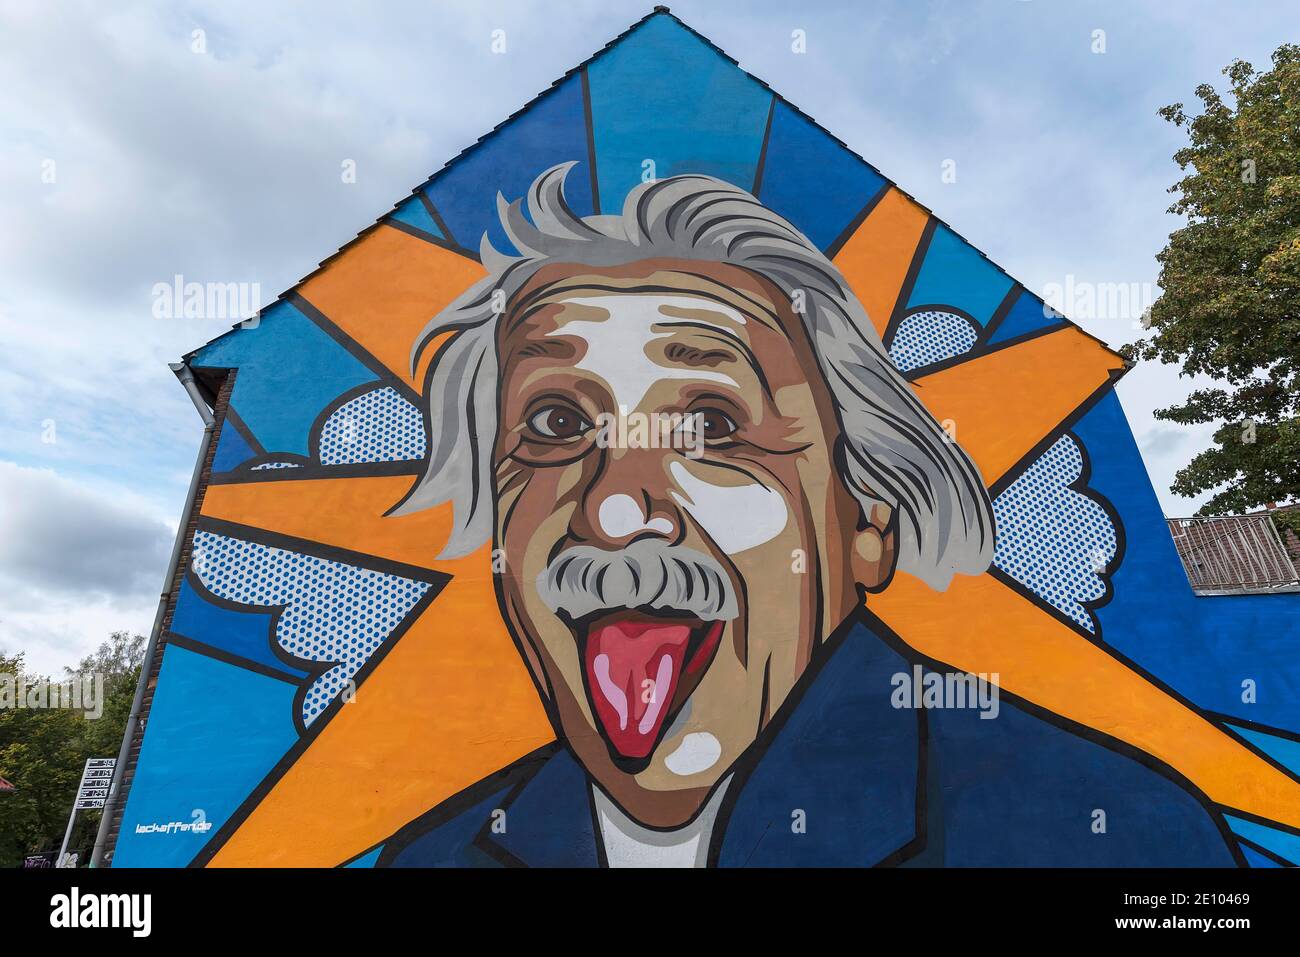 Graffiti by Albert Einstein on a house wall by the company lackaffen.de in Münster, Münster, North Rhine-Westphalia, Germany, Europe Stock Photo